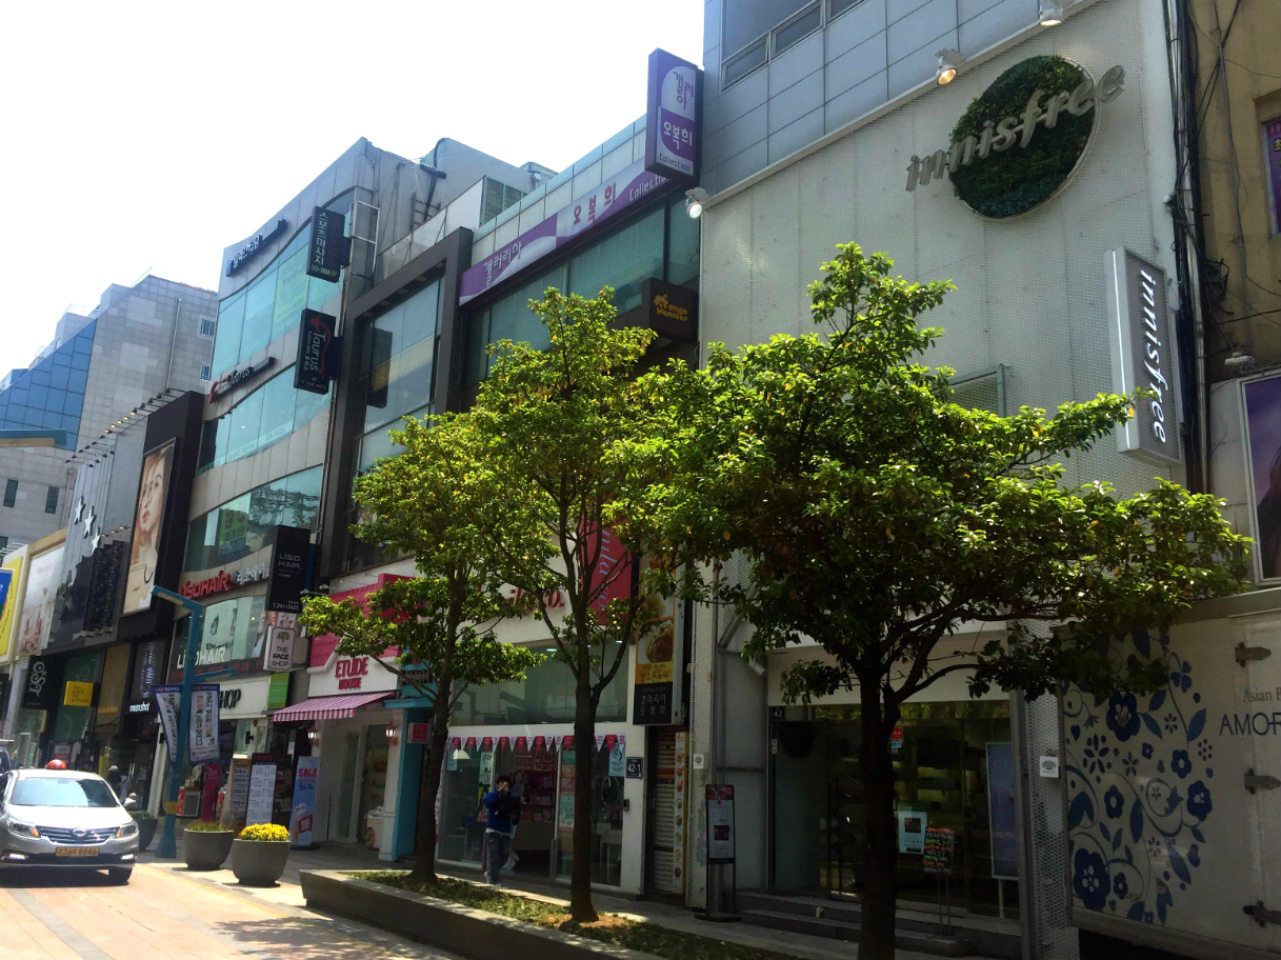 SKINCARE, ANYONE? Some brands you can find in Gukje International Market: Innisfree, Banila Co., Etude House, Face Shop. 